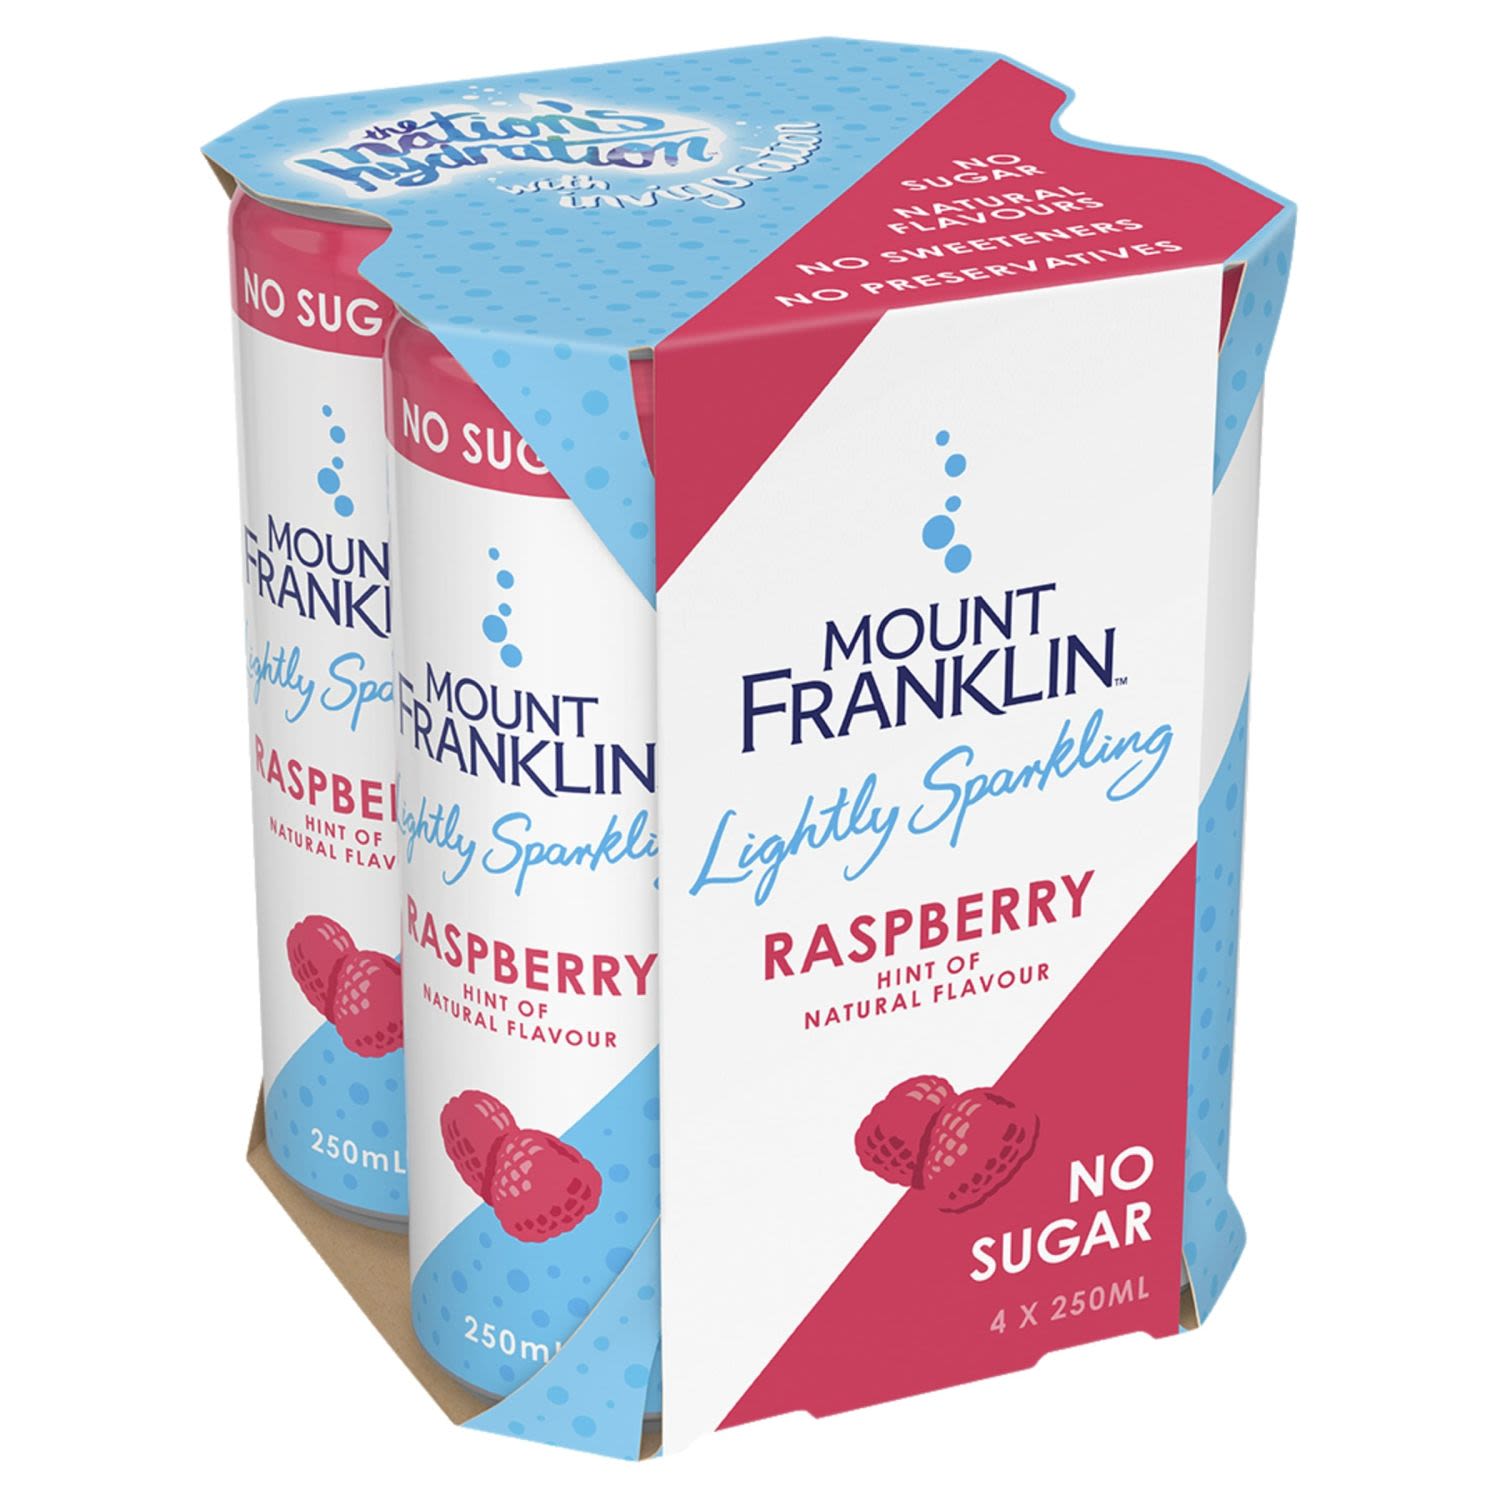 Mount Franklin Lightly Sparkling Water Raspberry Multipack Mini Cans, 4 Each